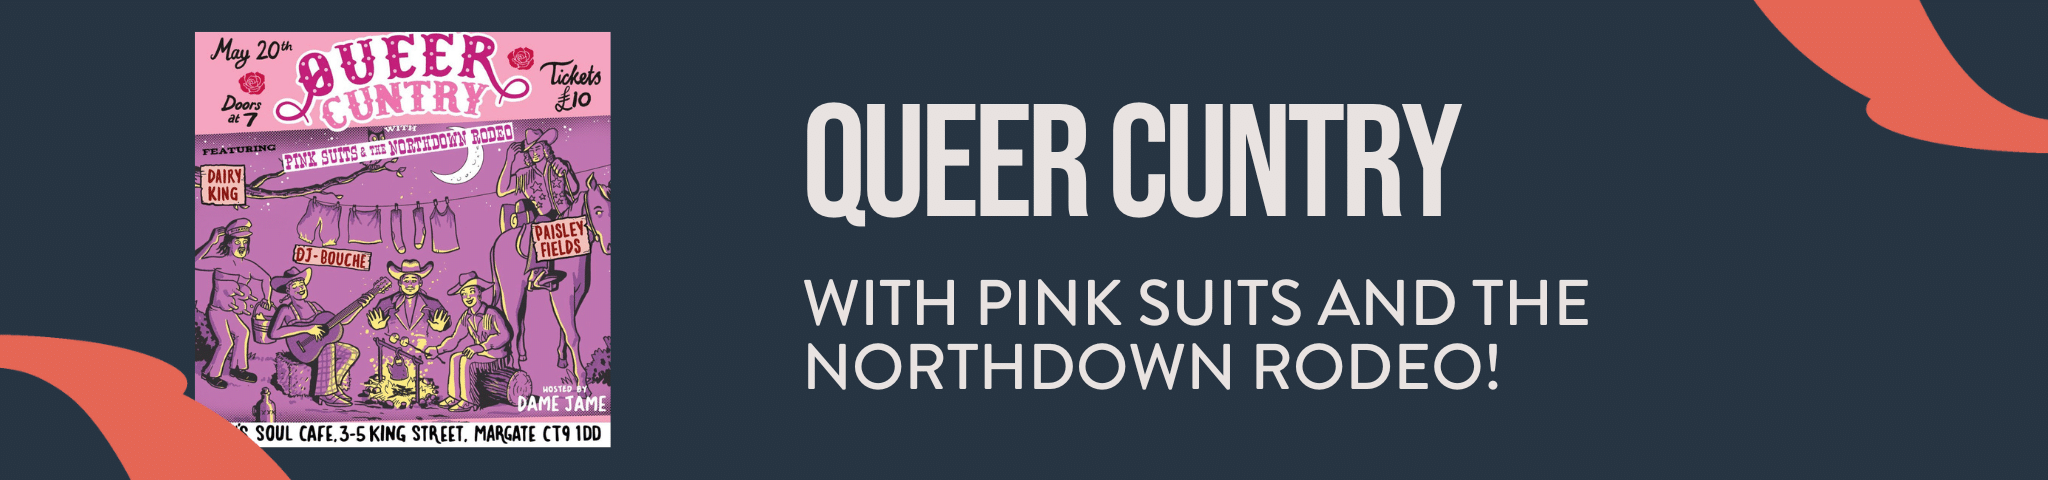 QUEER CUNTRY – 20TH MAY